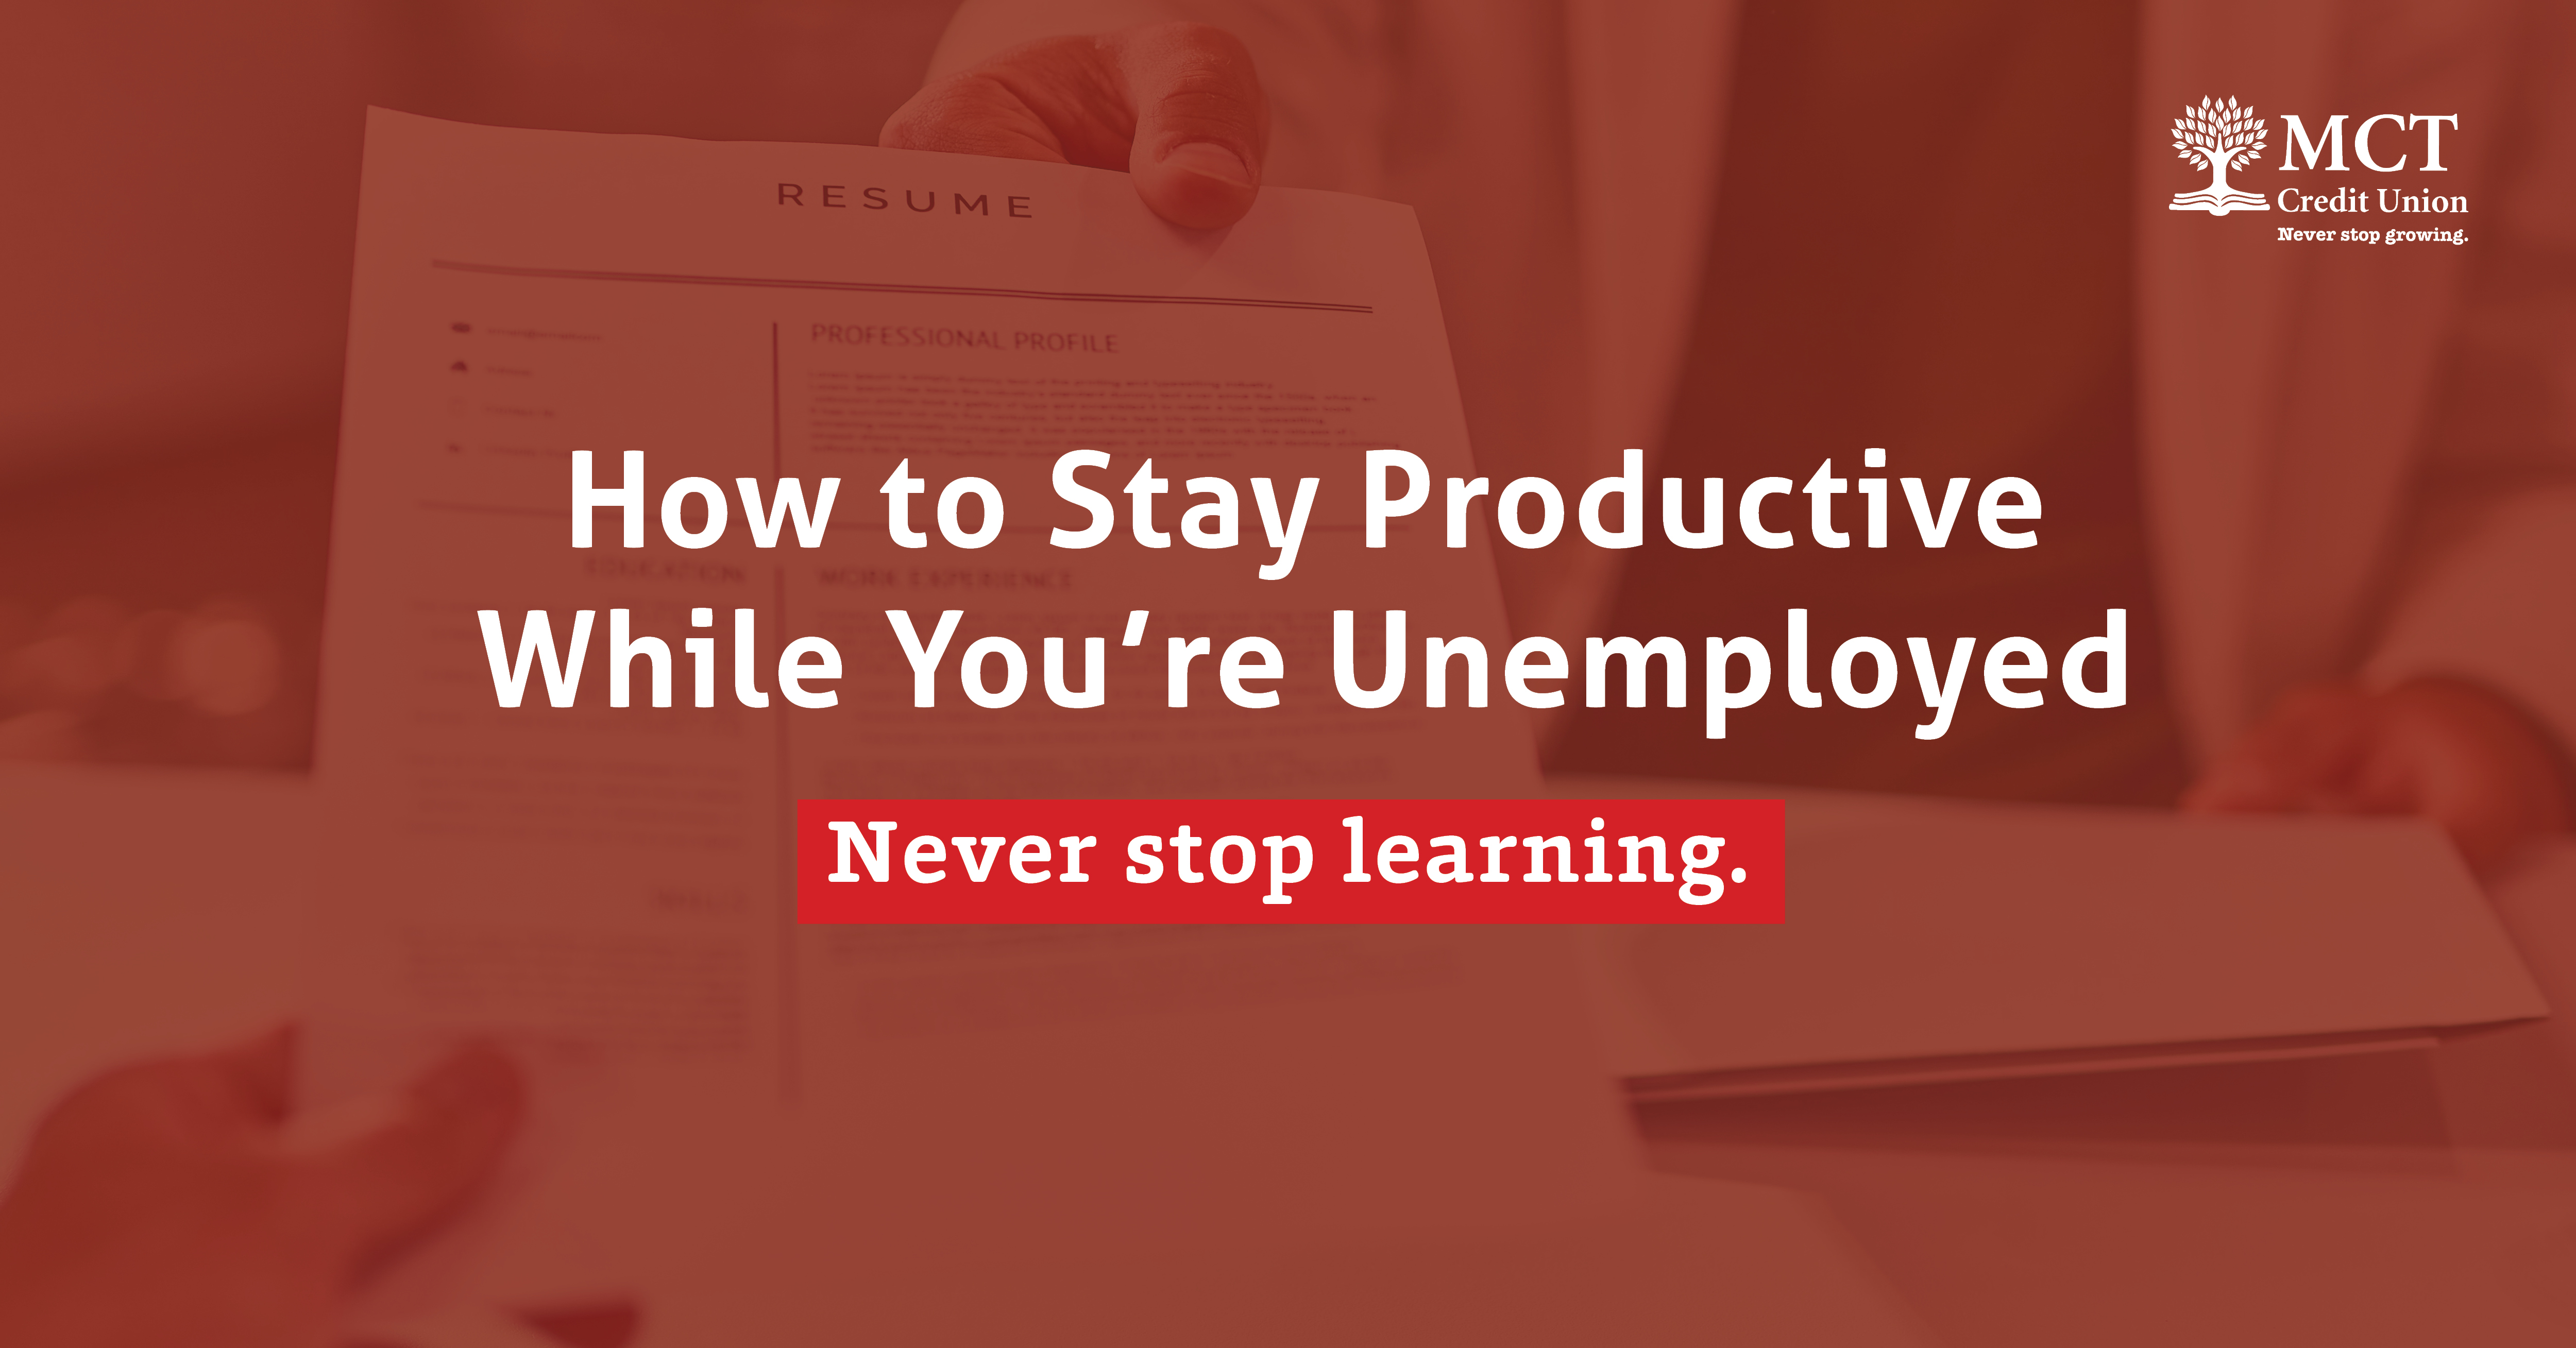 How to Stay Productive While You're Unemployed